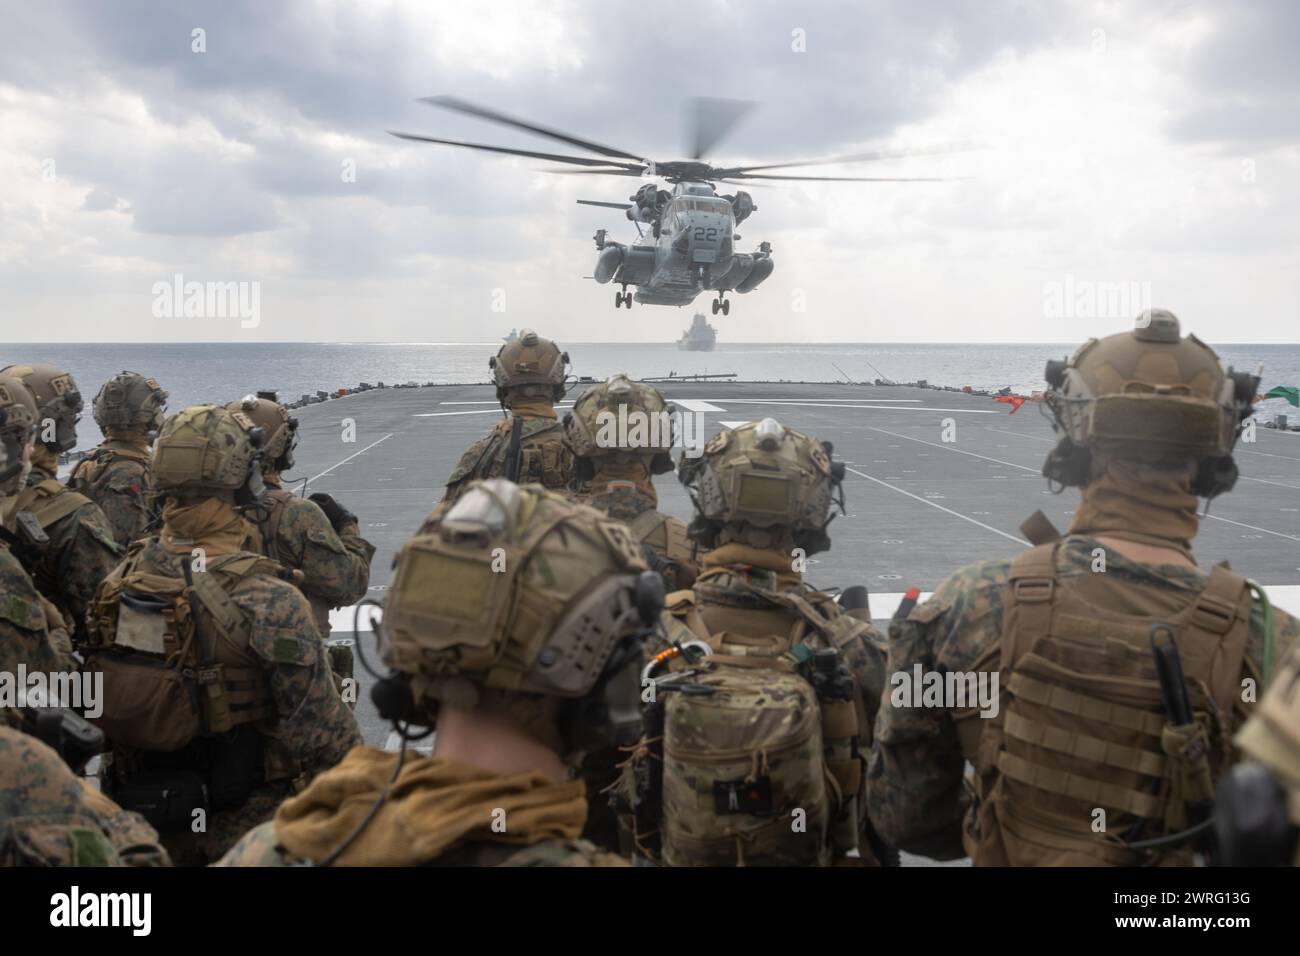 U.S. Marines with the maritime raid force, 31st Marine Expeditionary Unit, prepare to board a CH-53E Super Stallion during a visit, board, and search Stock Photo